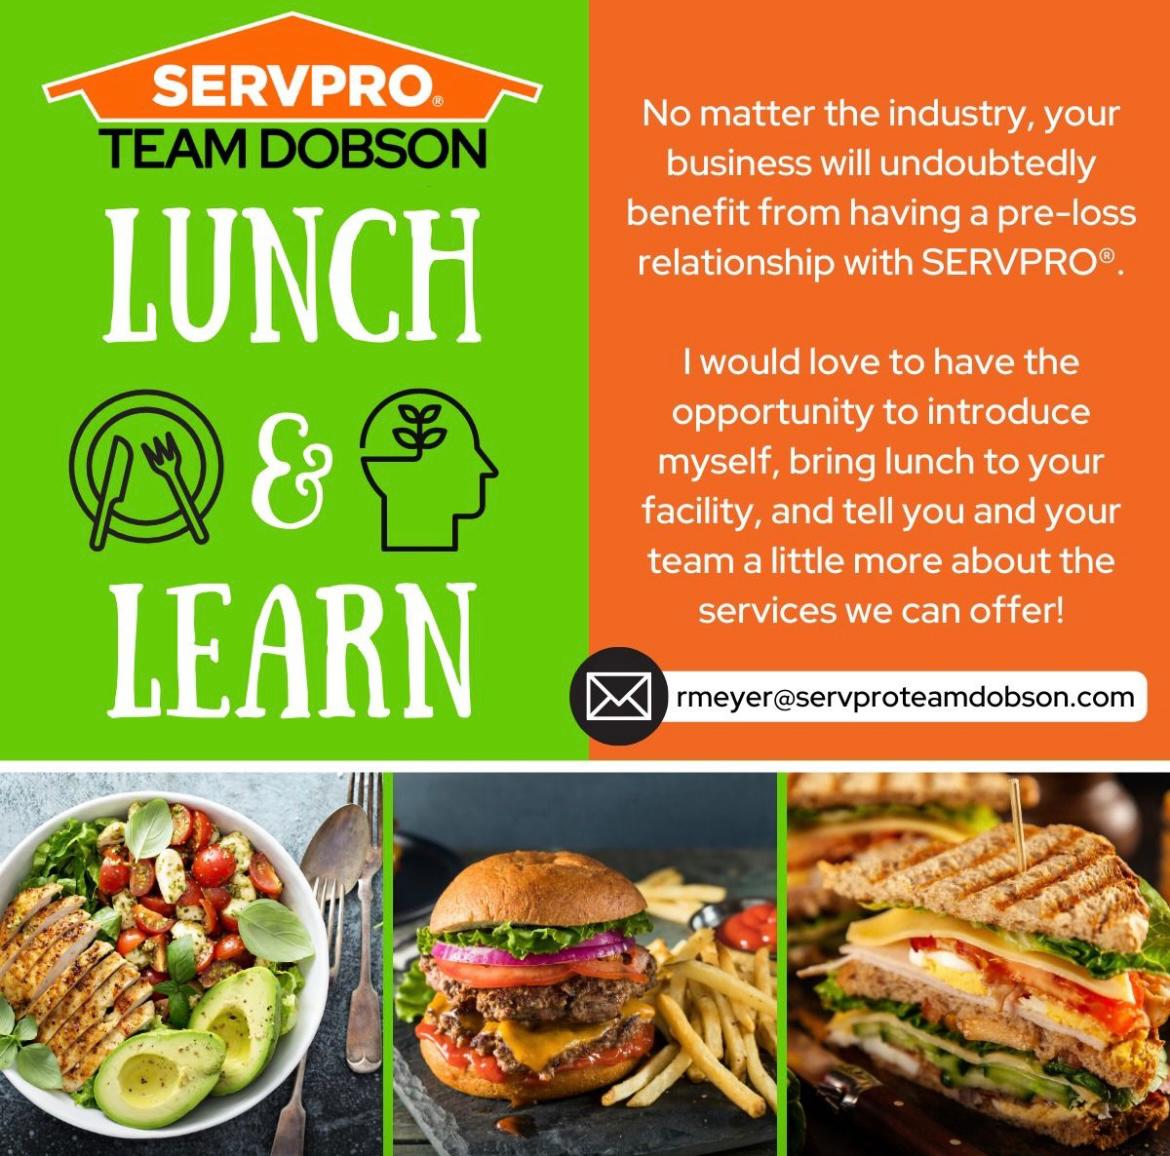 SERVPRO offers free lunch and learns to businesses in our community.